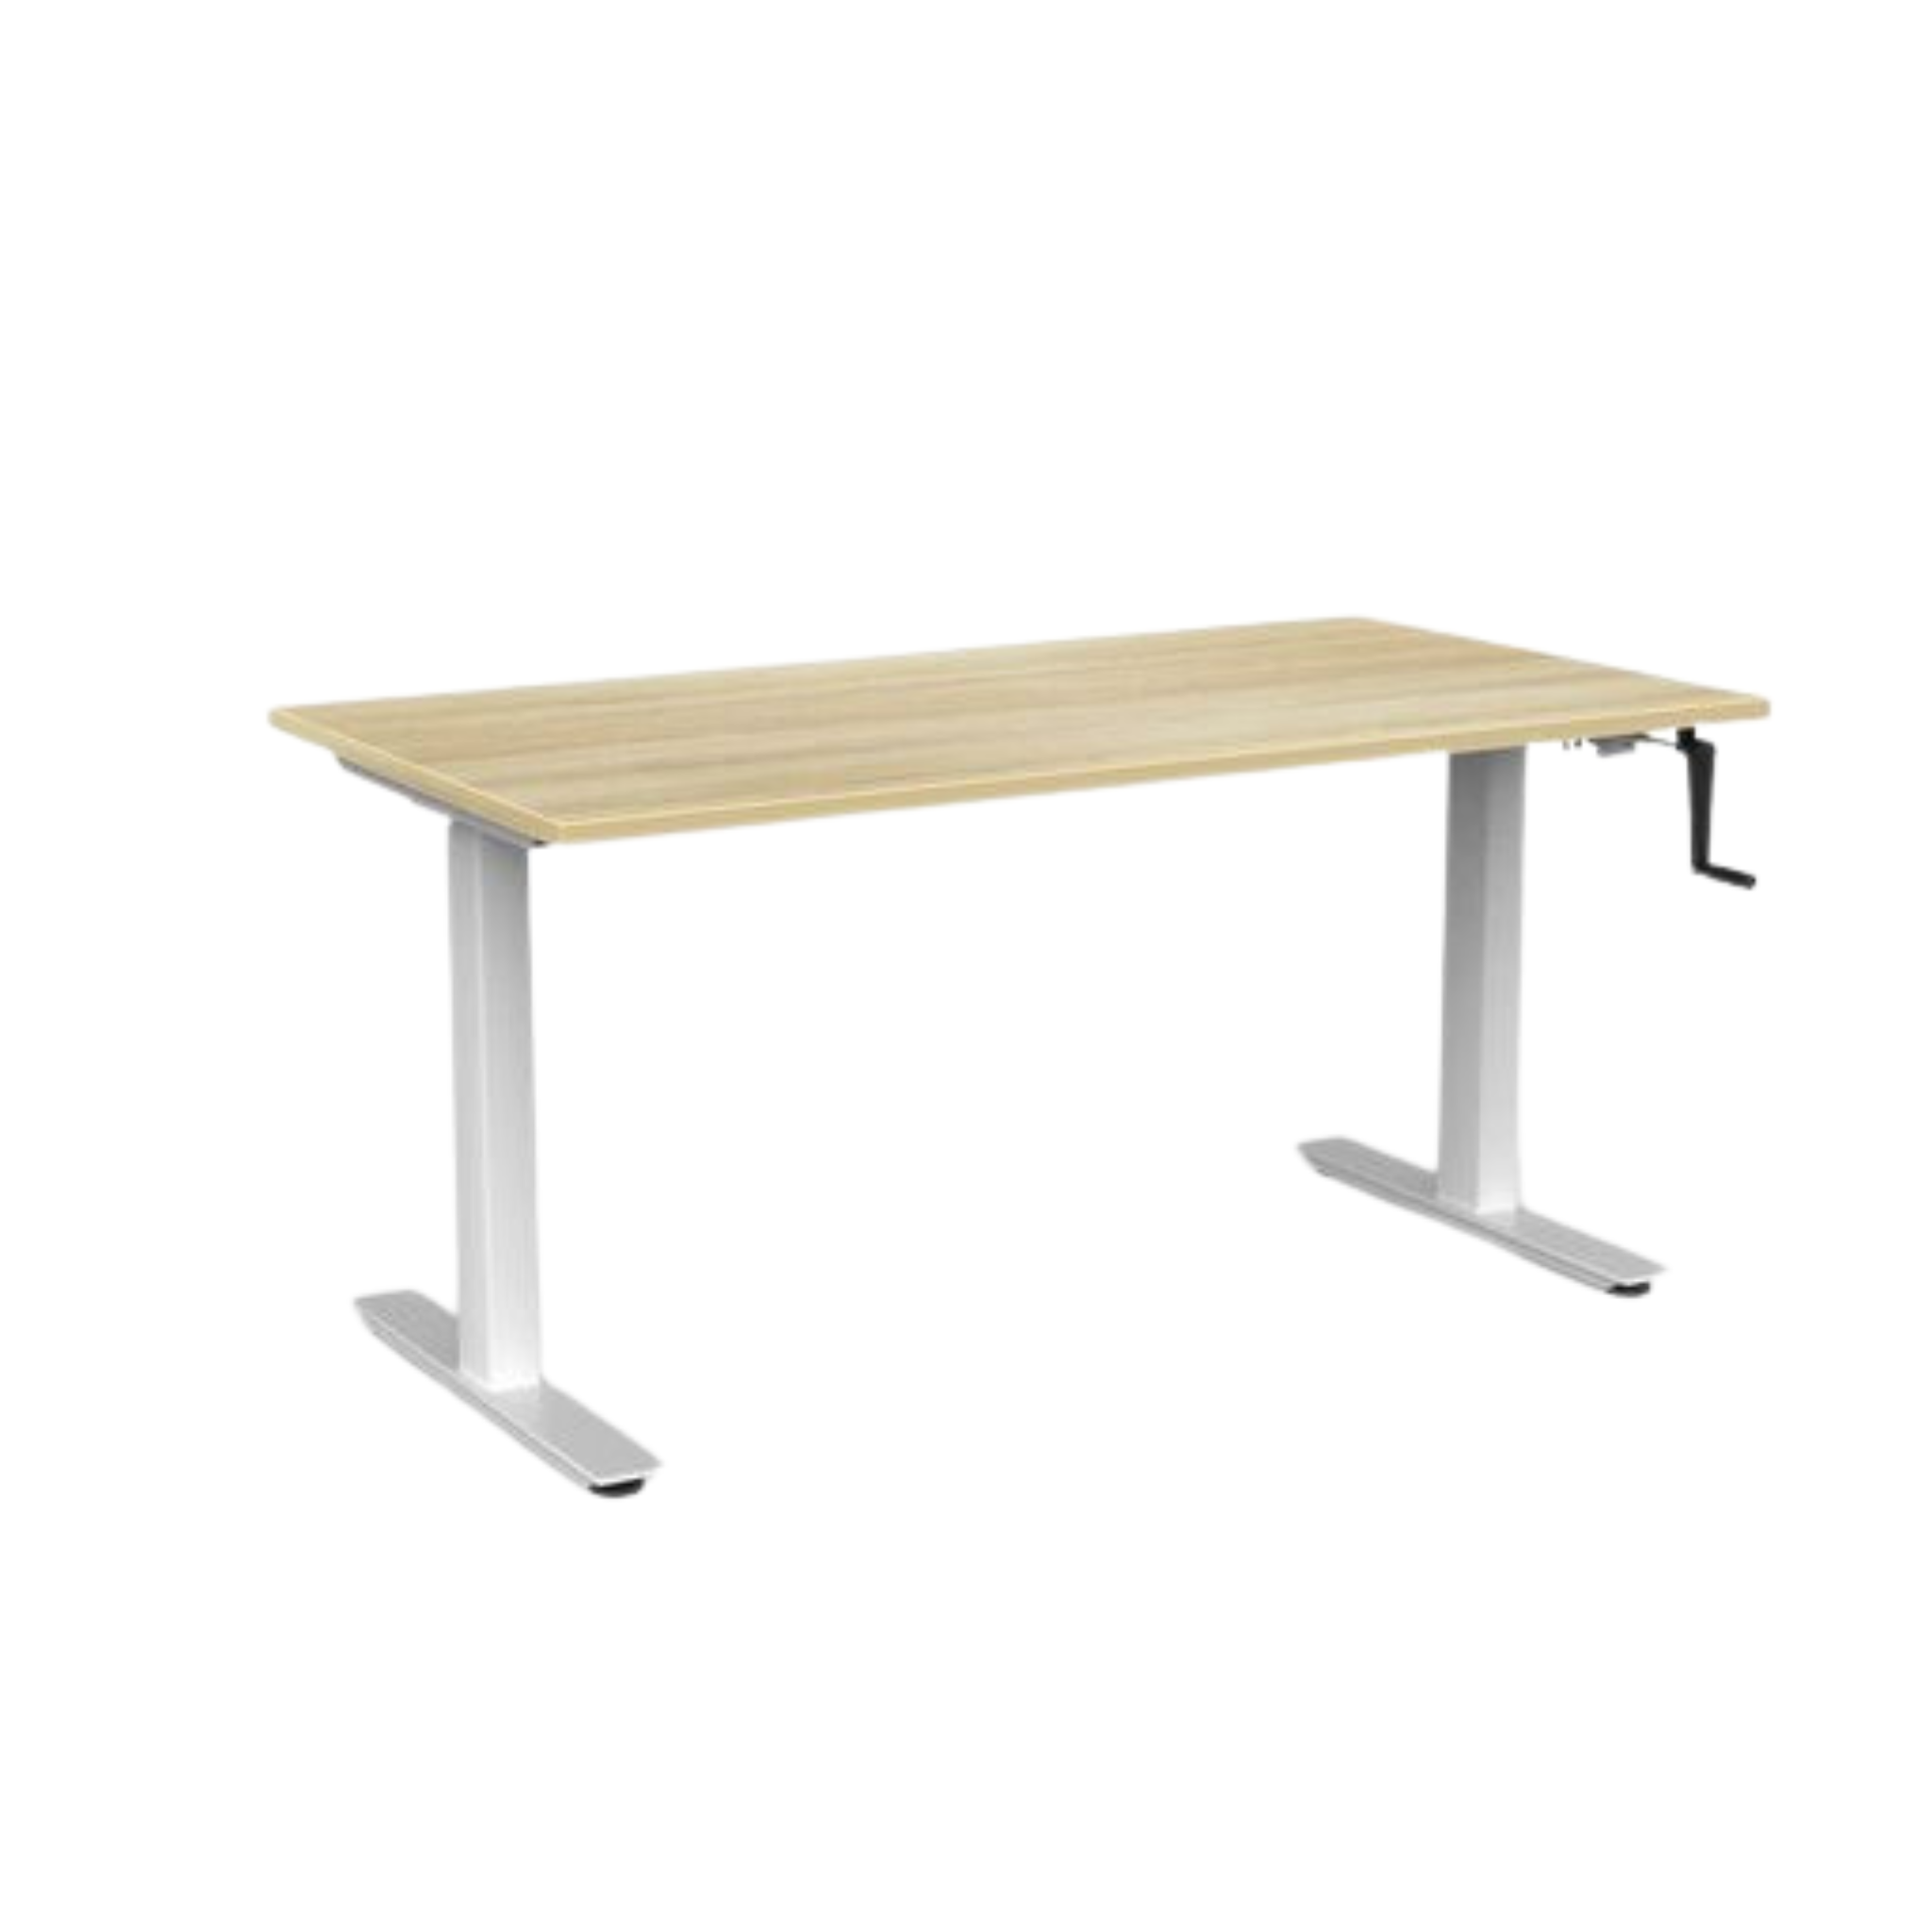 Agile winder sit to stand desk with white frame and atlantic oak top